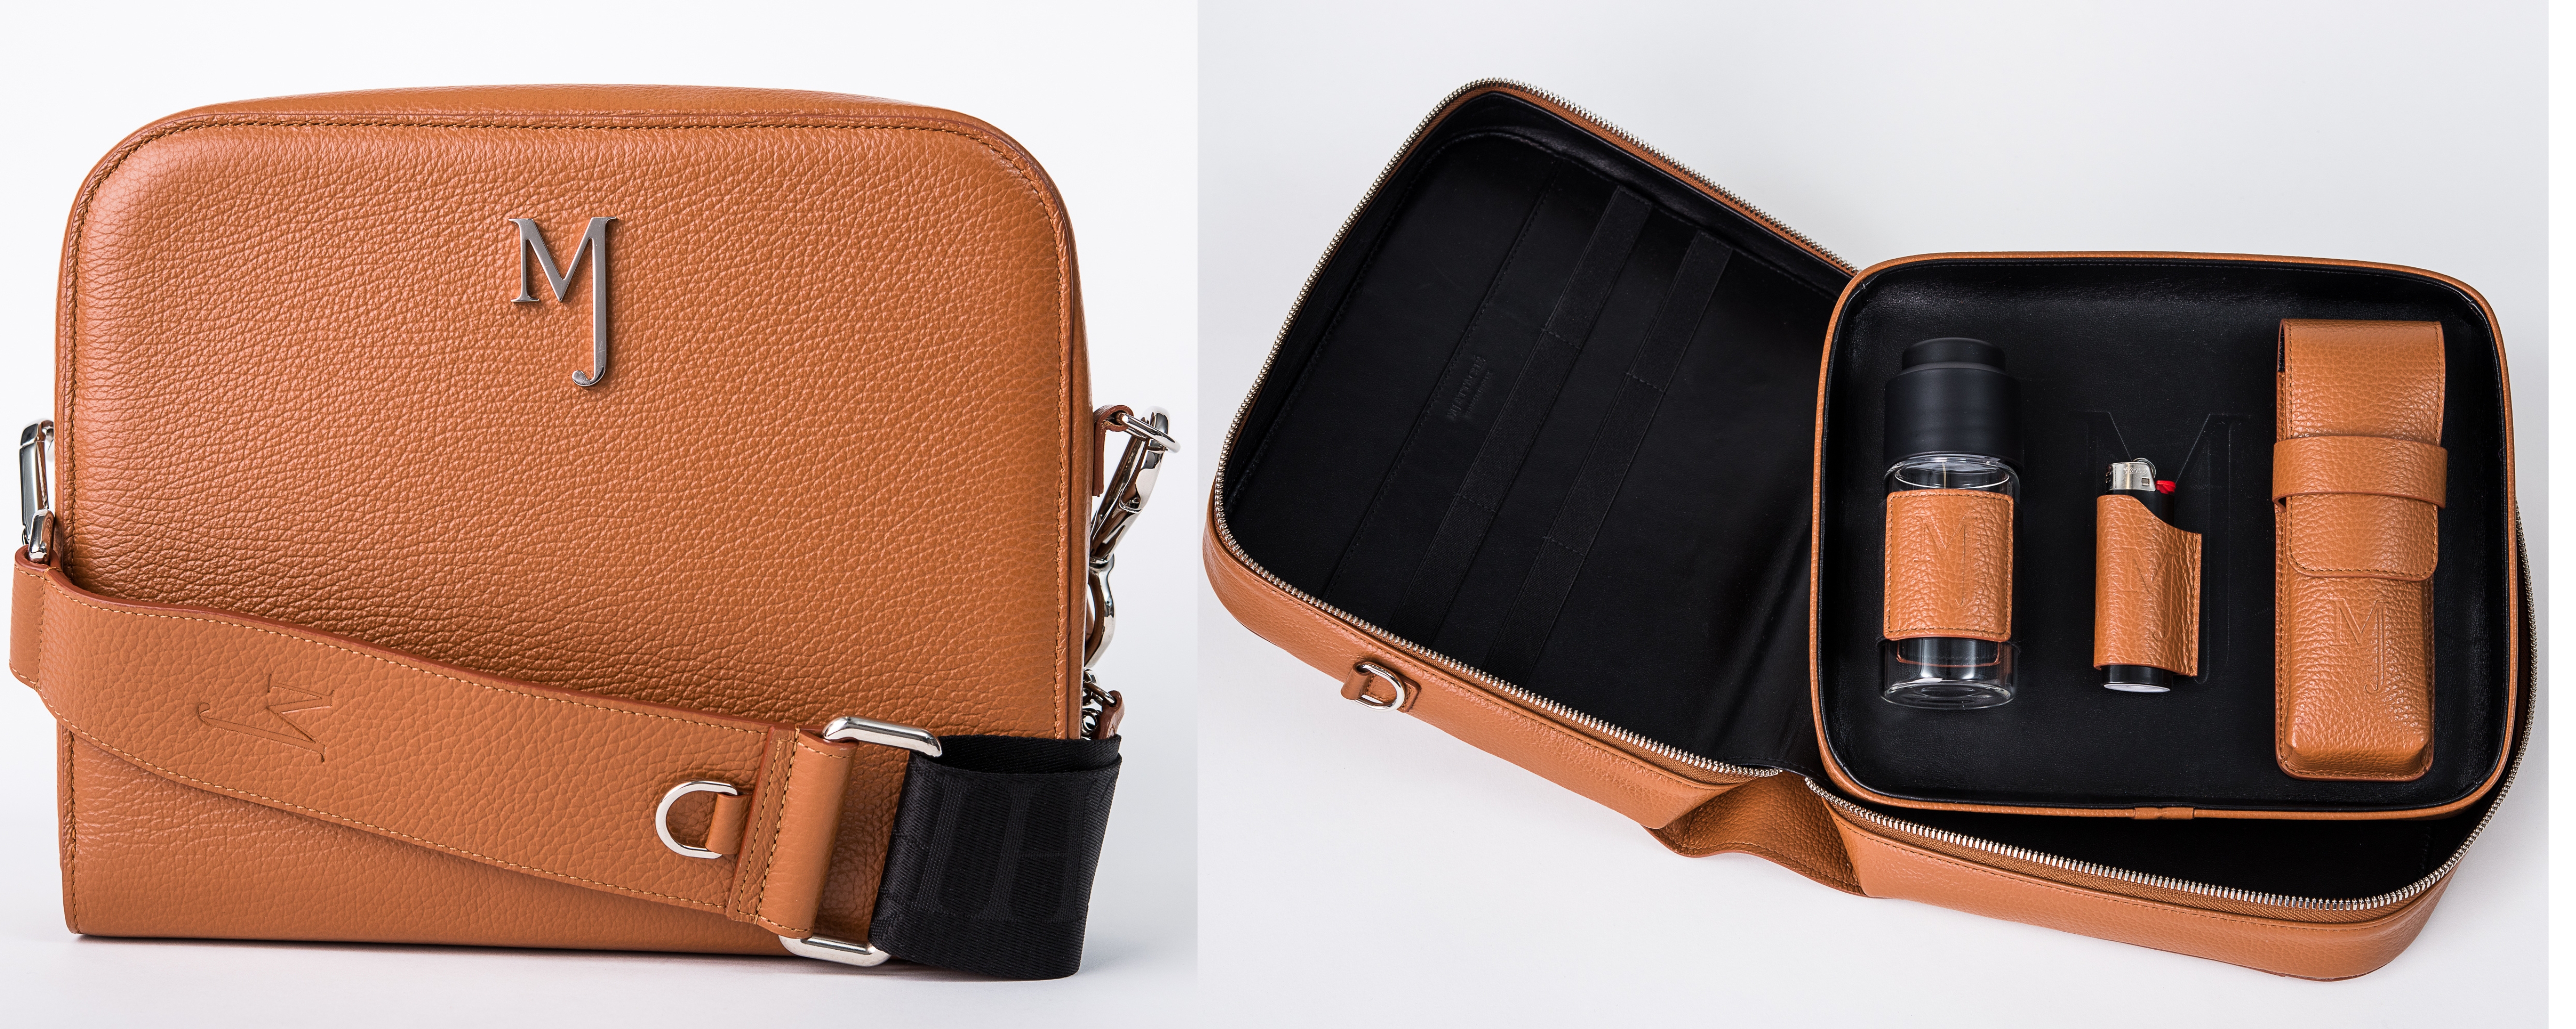 MJ Attach debuts The Anthony, a first-of-its-kind, premium, 100% Italian leather bag for cannabis cache and carry